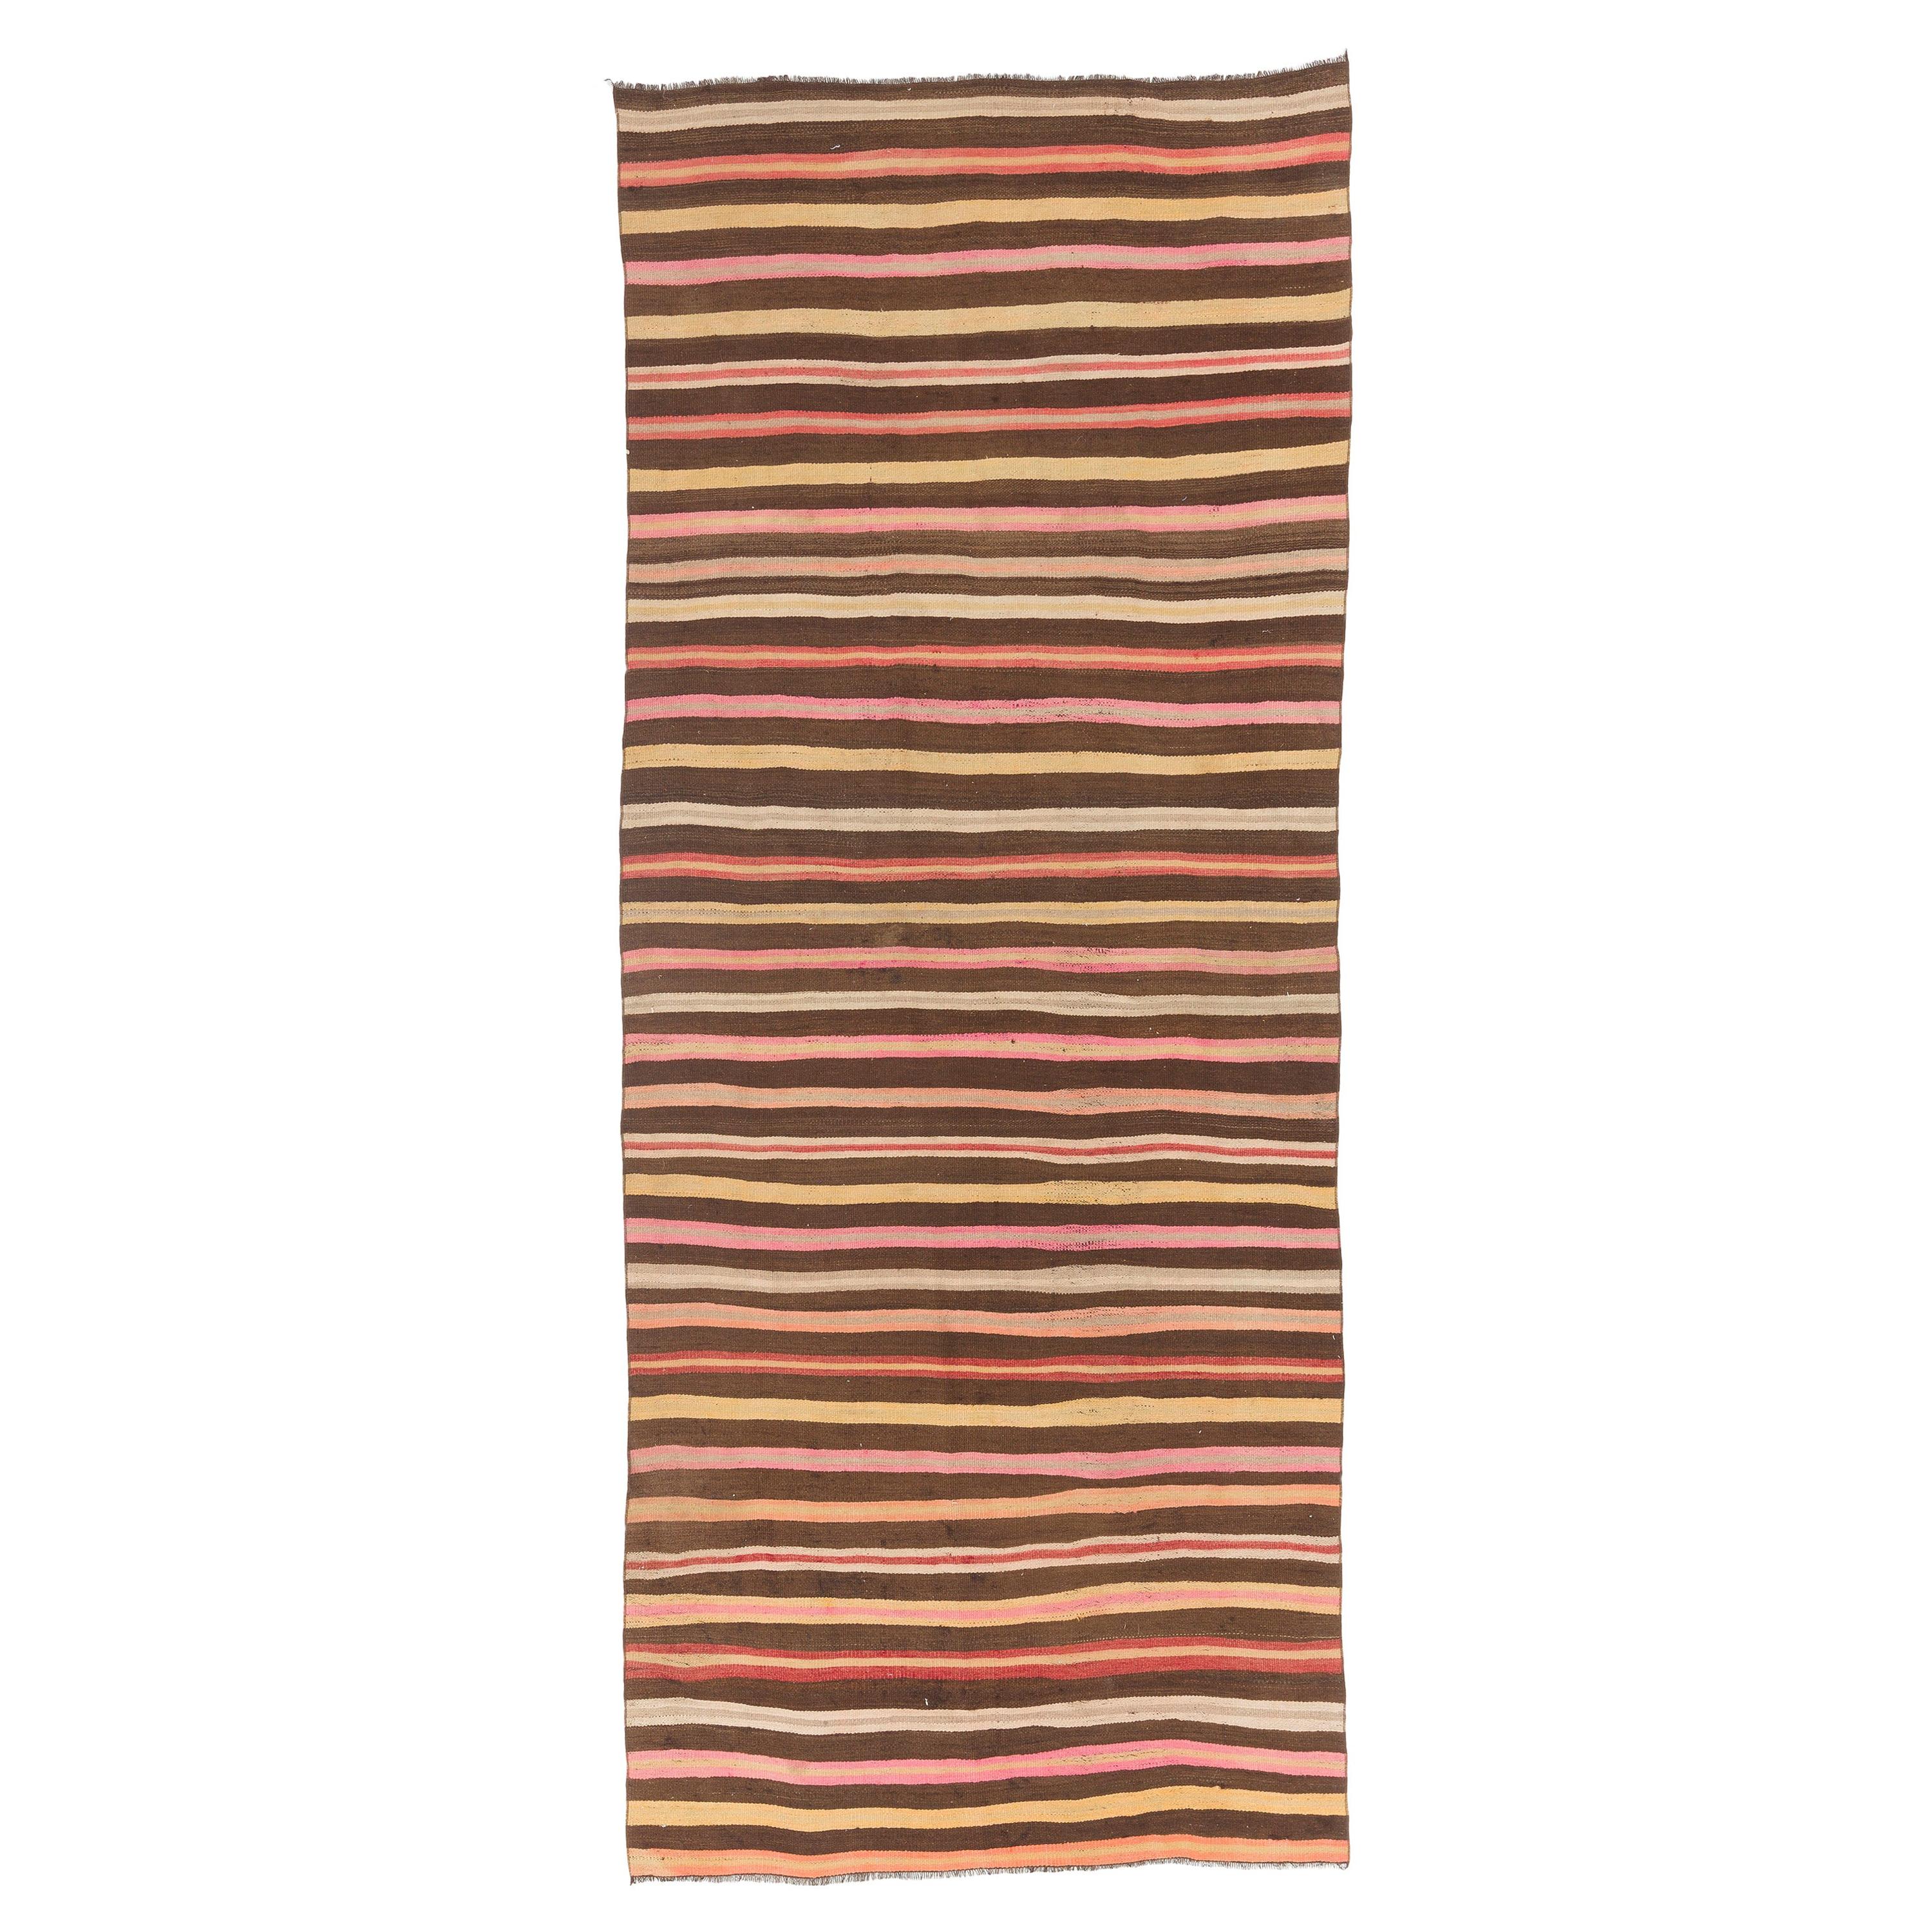 5x11.8 Ft Handmade Kilim Runner with Soft Green, Yellow, Brown and Pink Stripes